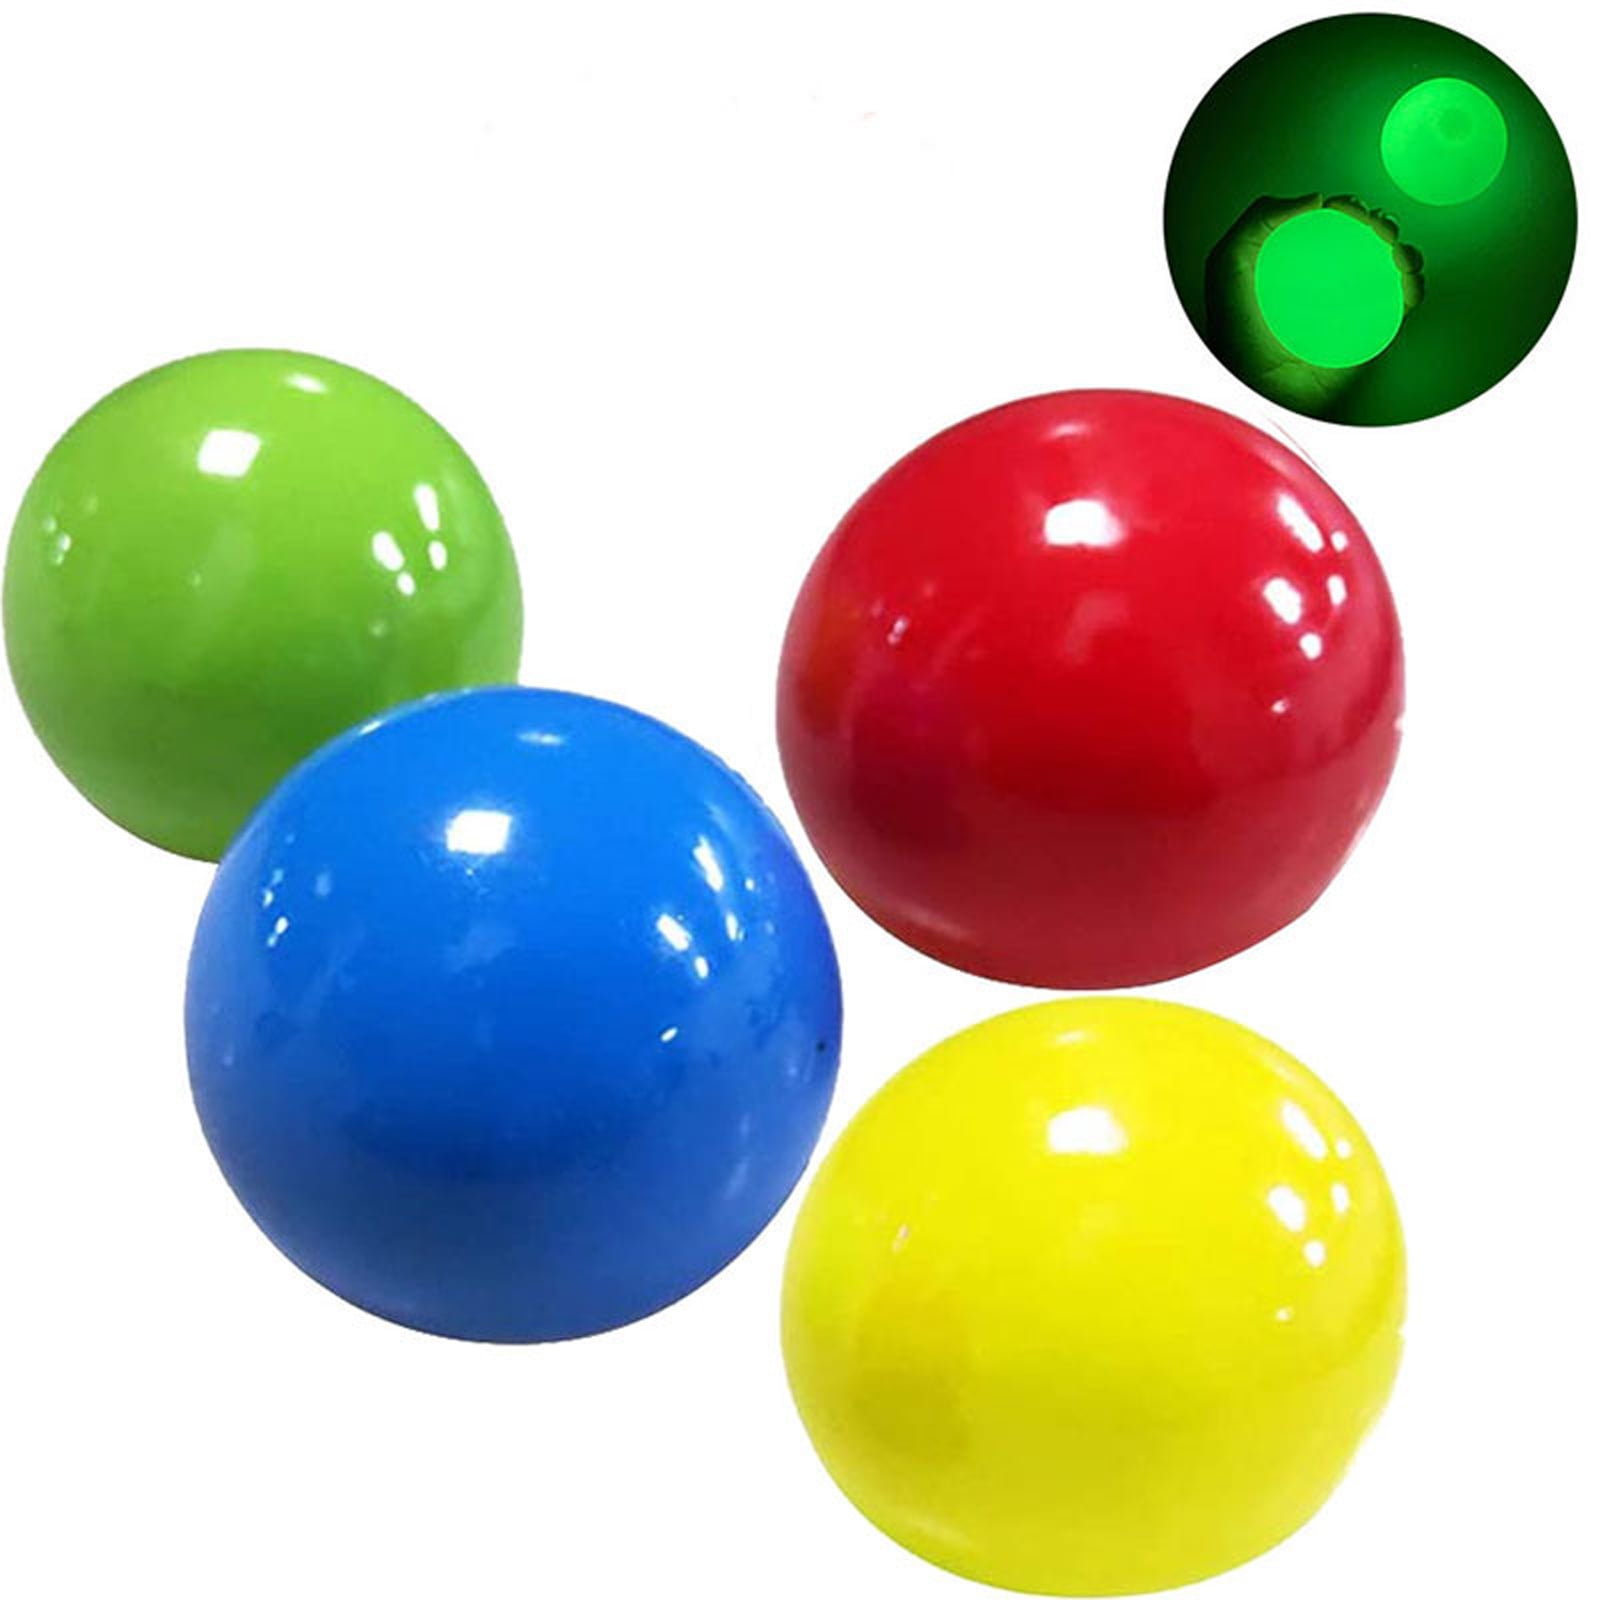 4pcs Sticky Wall Ball Decompression Toy Glowing Ball Sticky Globbles Ball Stress Toy Fluorescent Sticky Wall Ball Stress Relief BallsToy Gift for Adult and Kids